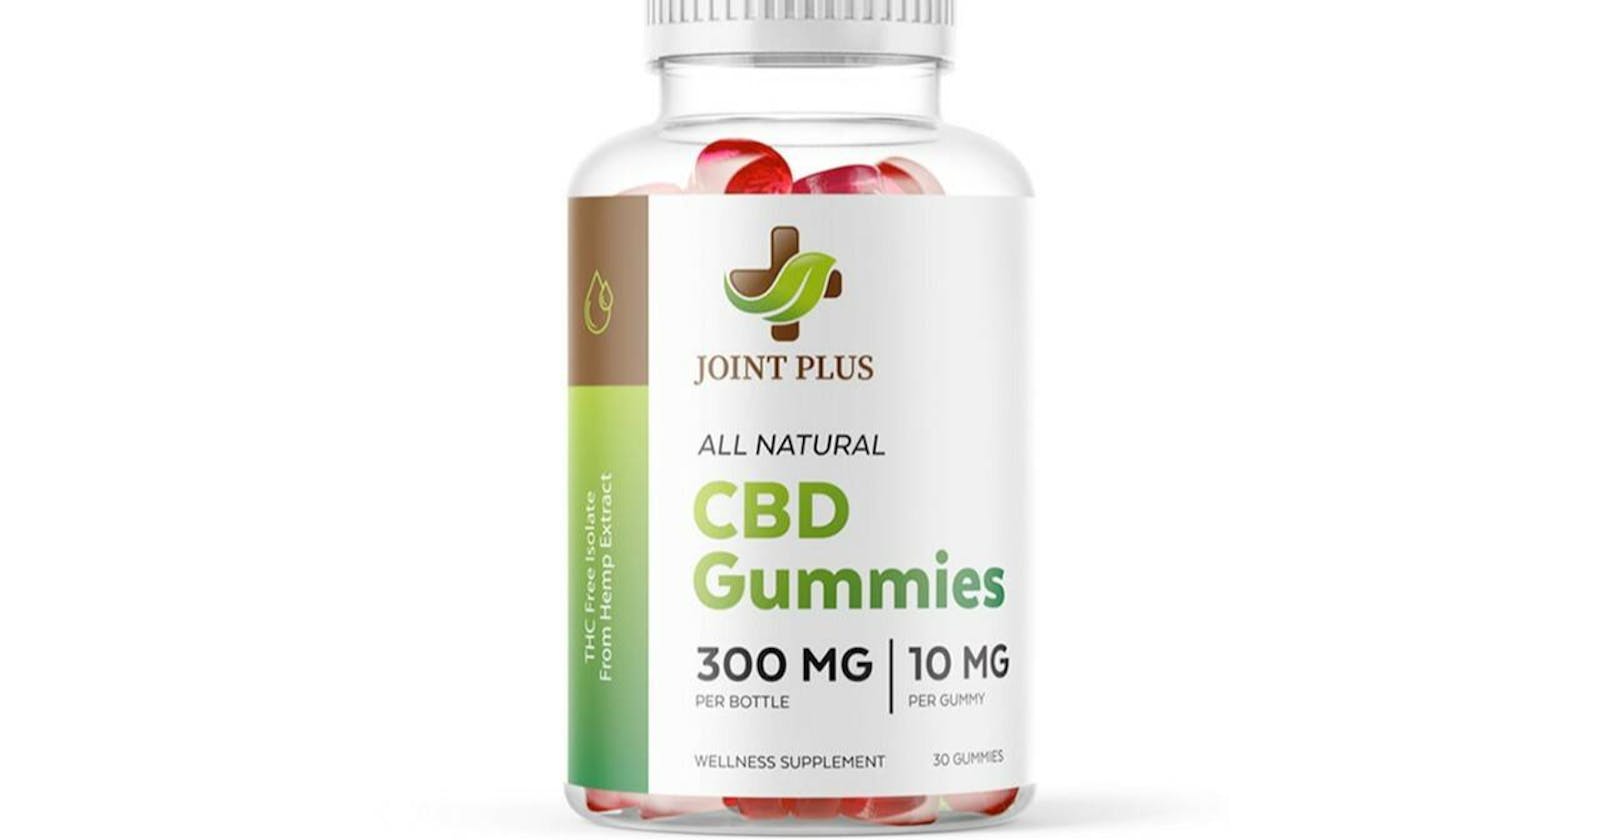 Joint Plus CBD Gummies Reviews (USA): Is It Legitimate Or Scammer?